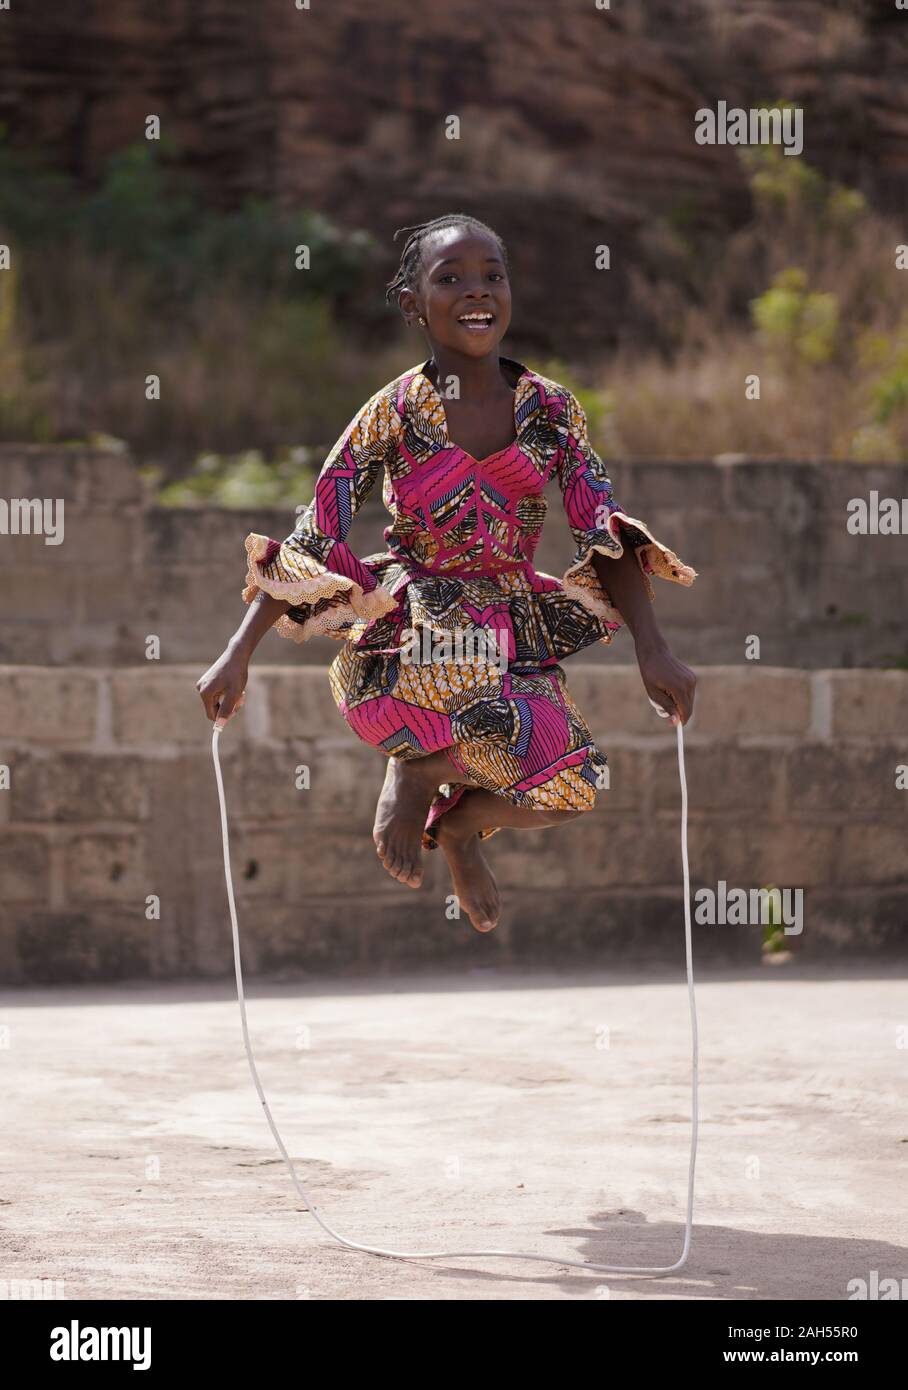 Smiling African Girl Jumping High With Her Skipping Rope With Both Legs At A Time Stock Photo